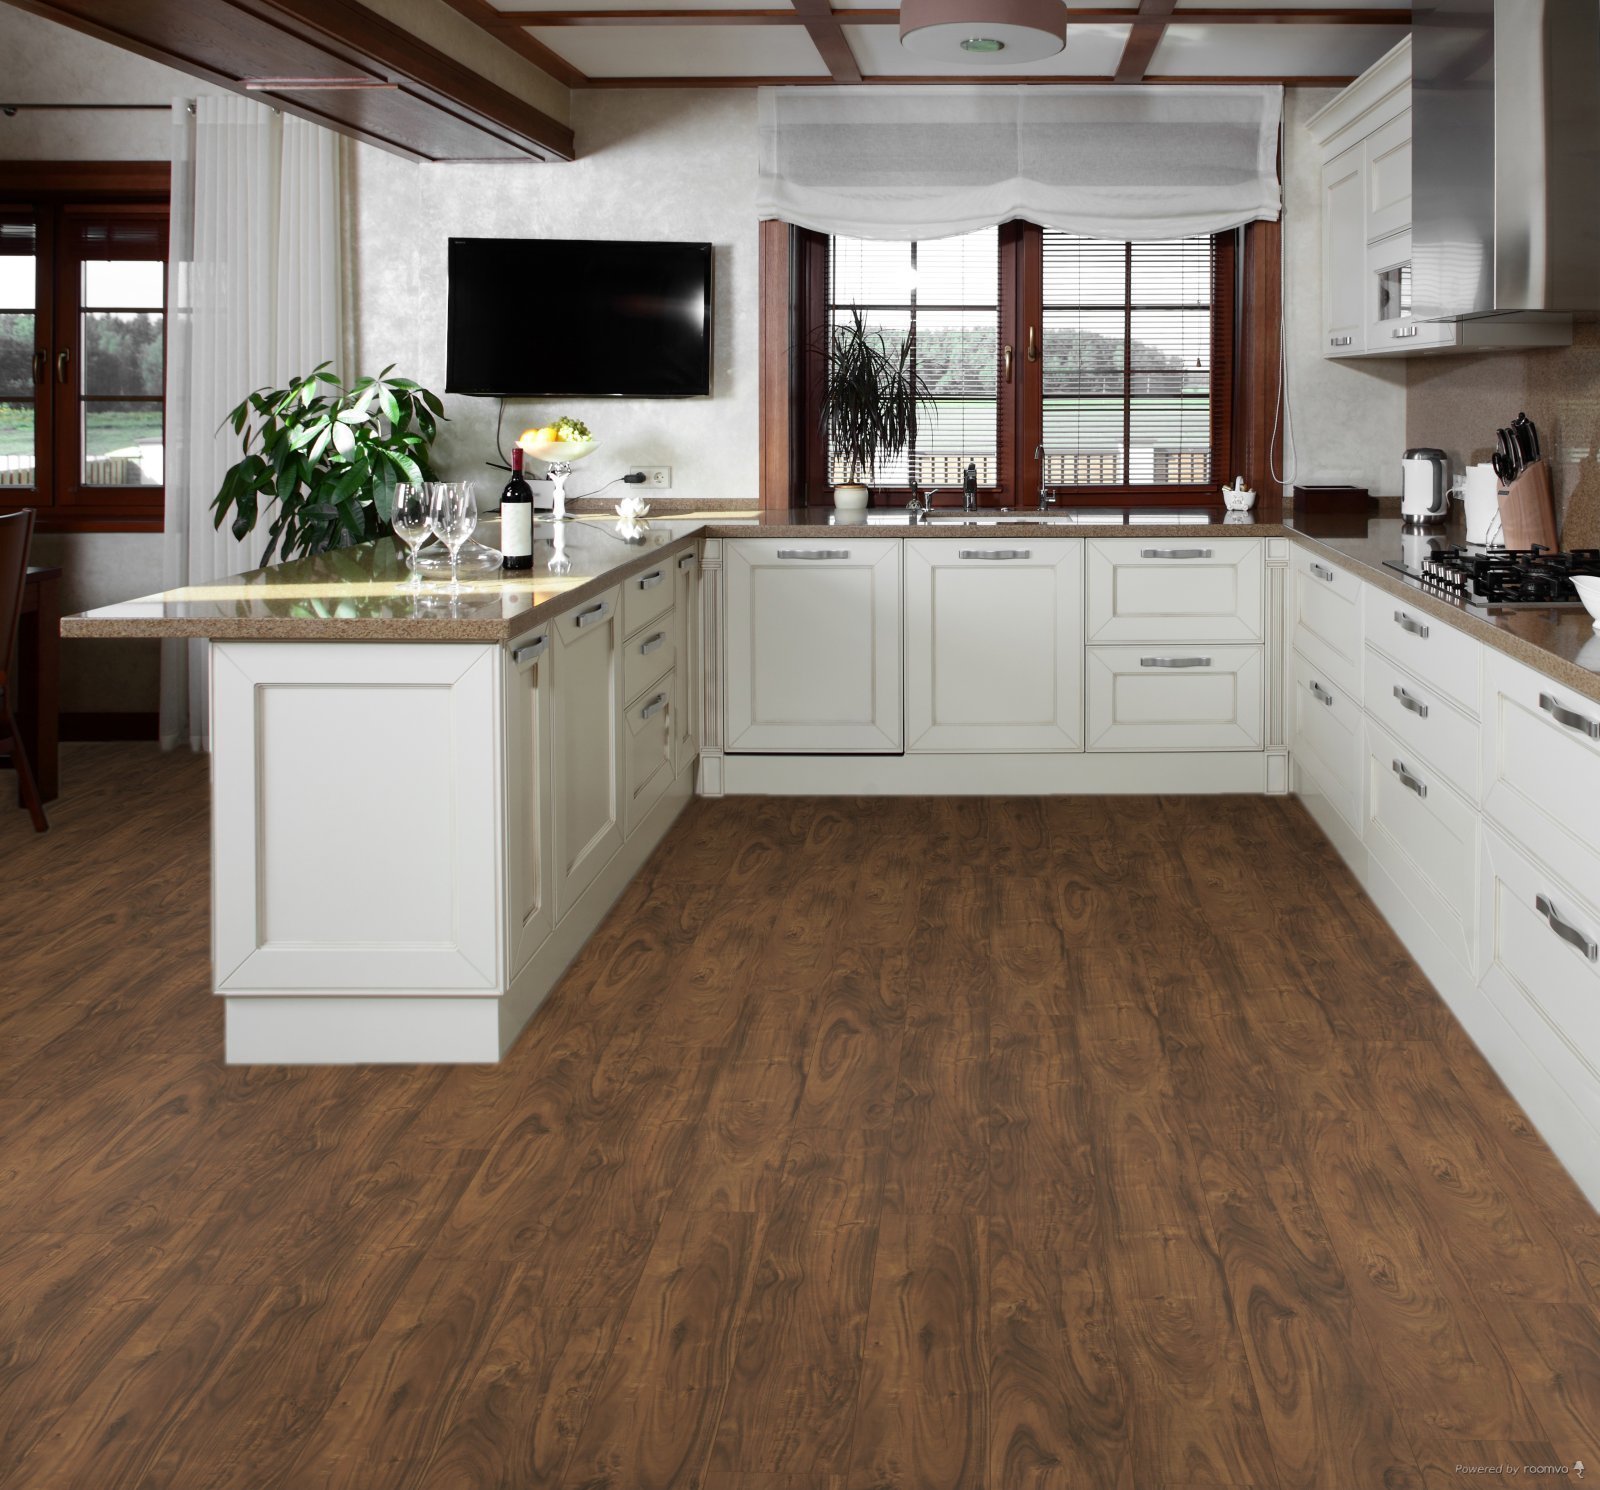 Horizen Flooring presents to you a picture of a quality wide plank Chapel Hill luxury vinyl plank. NovoCore Premium EIR collection features a wide range of colors & designs that will compliment any interior. Natural wood grain synchronized surface allow for an authentic hardwood look & feel. This collection features a 0.25″ / 6.5 mm overall thickness and a durable 22 mil / 0.55 mm wear layer for residential and commercial applications.